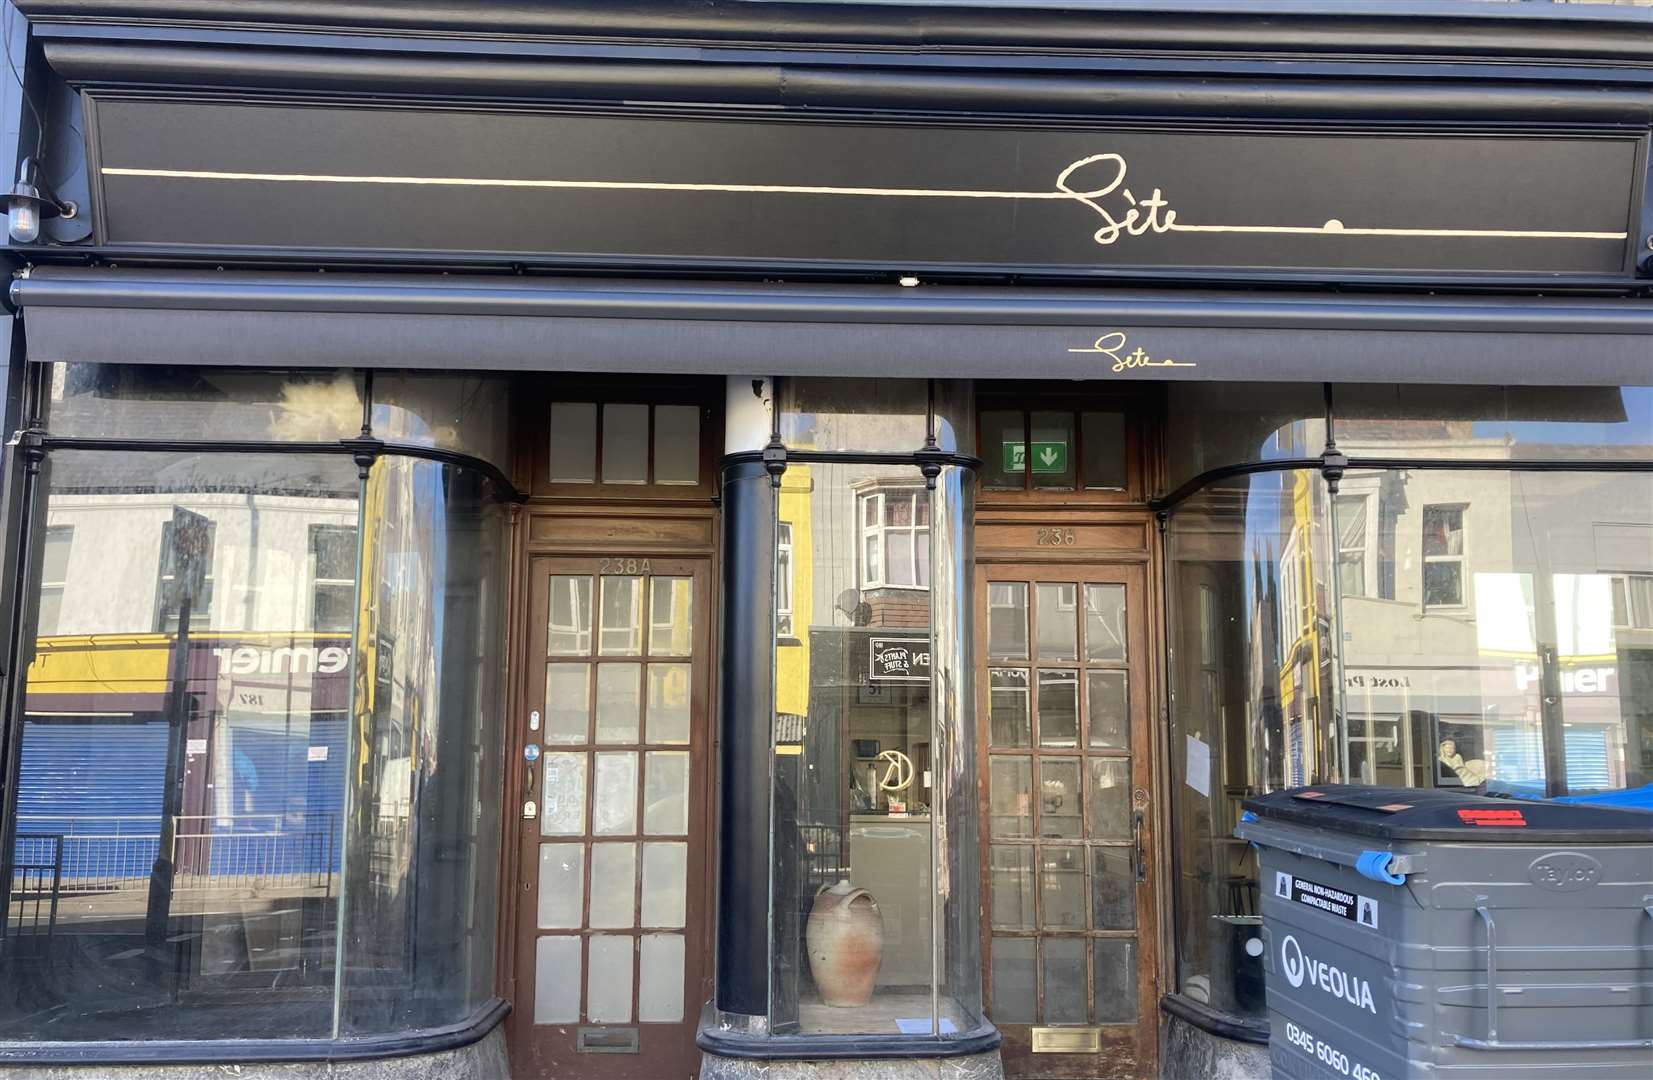 The new bar will open on October 21 at 238 Northdown Road. Pic: Seté